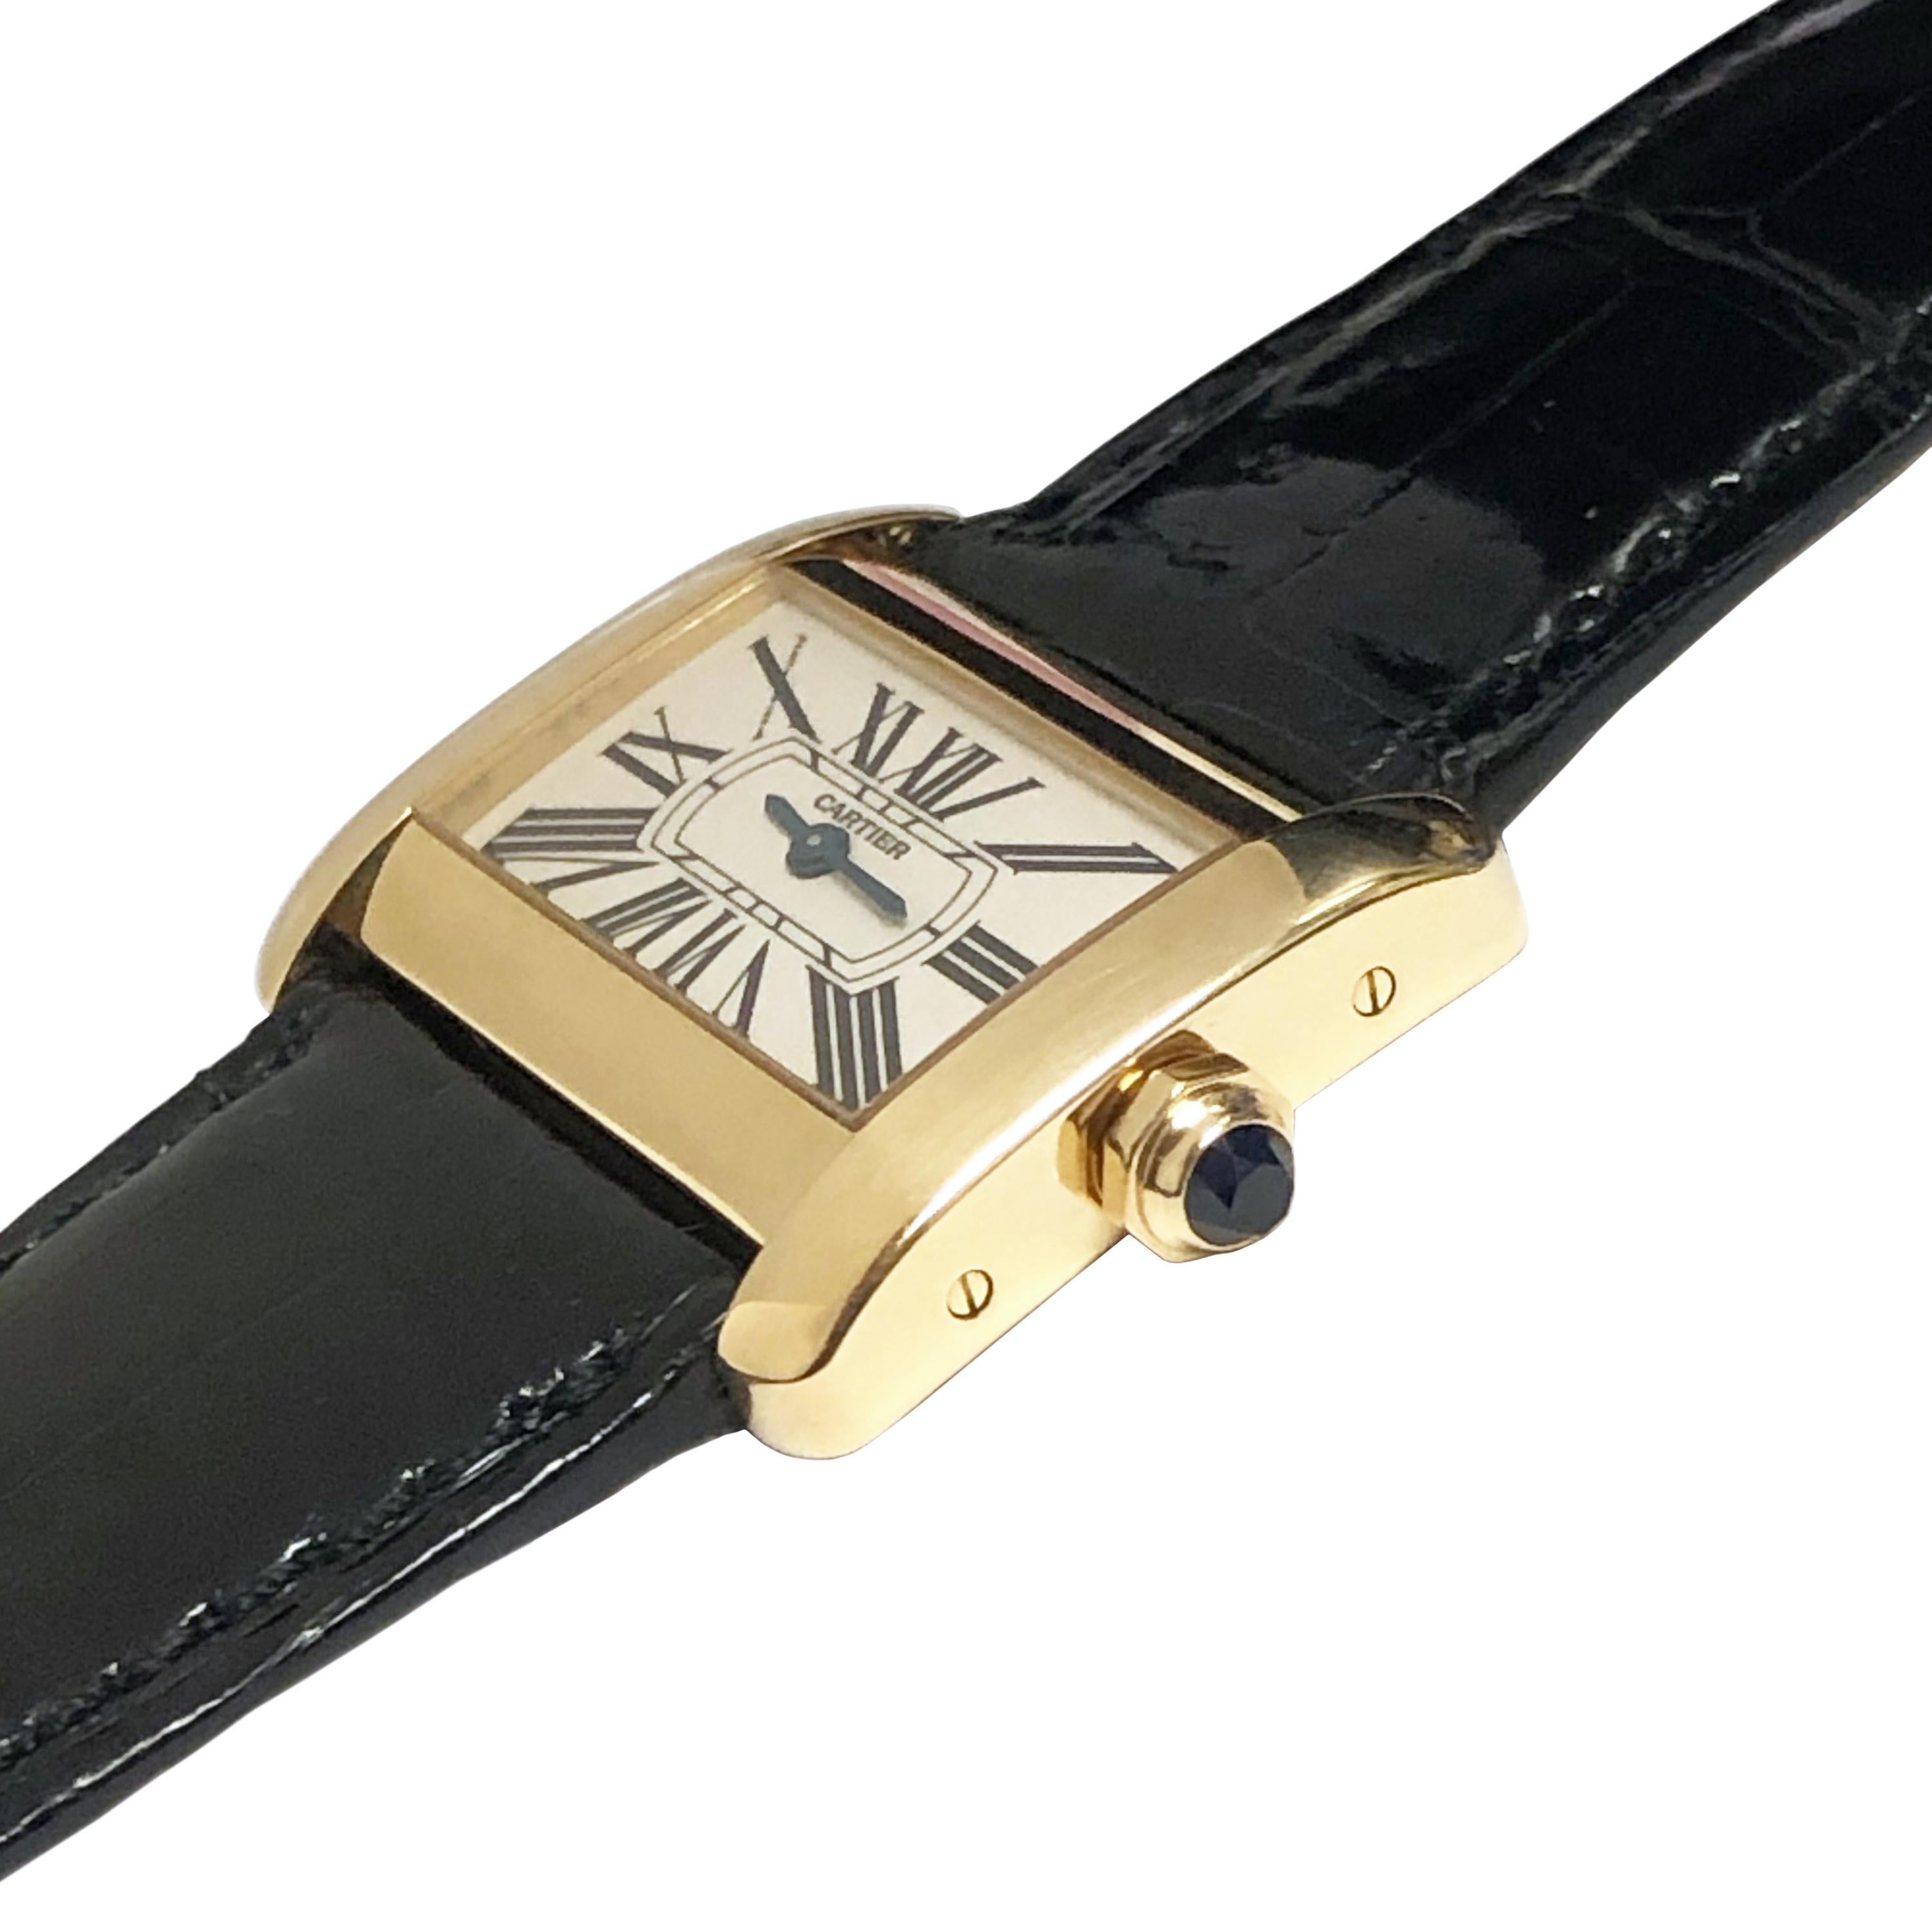 Circa 2005 Cartier Tank Divan Wrist watch, 31 X 25 M.M. 18K yellow Gold Water resistant case, Quartz movement, white dial with Black Roman numerals and a Sapphire crown. New, Cartier Black Croco strap with original Cartier 18K Gold tang buckle,